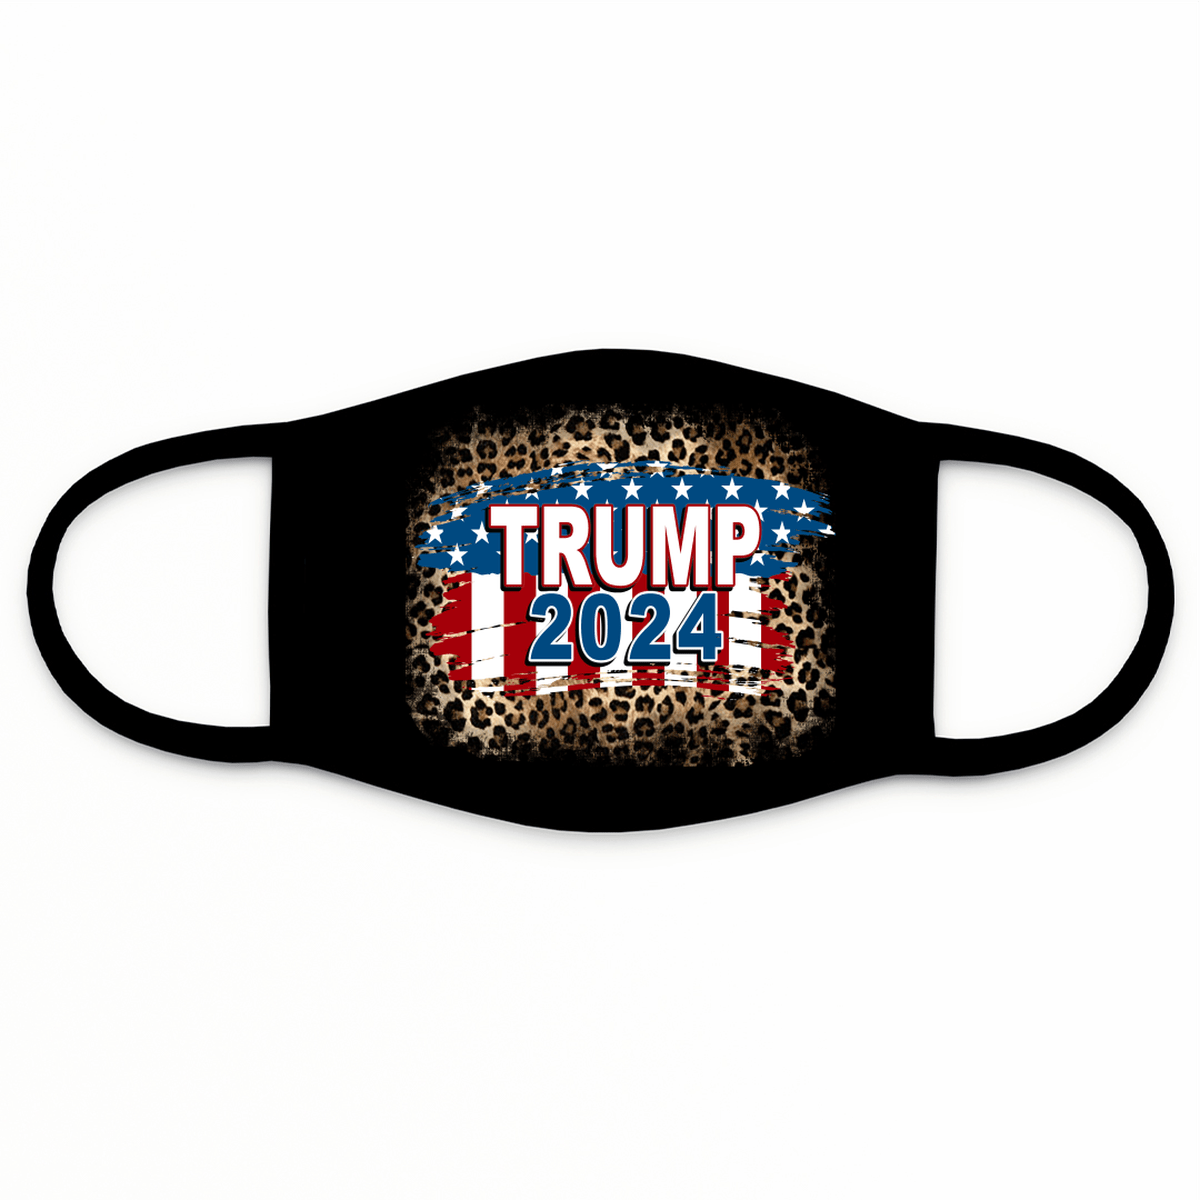 Trump 2024 size .5 DTF TRANSFERPRINT TO ORDER - Do it yourself Transfers